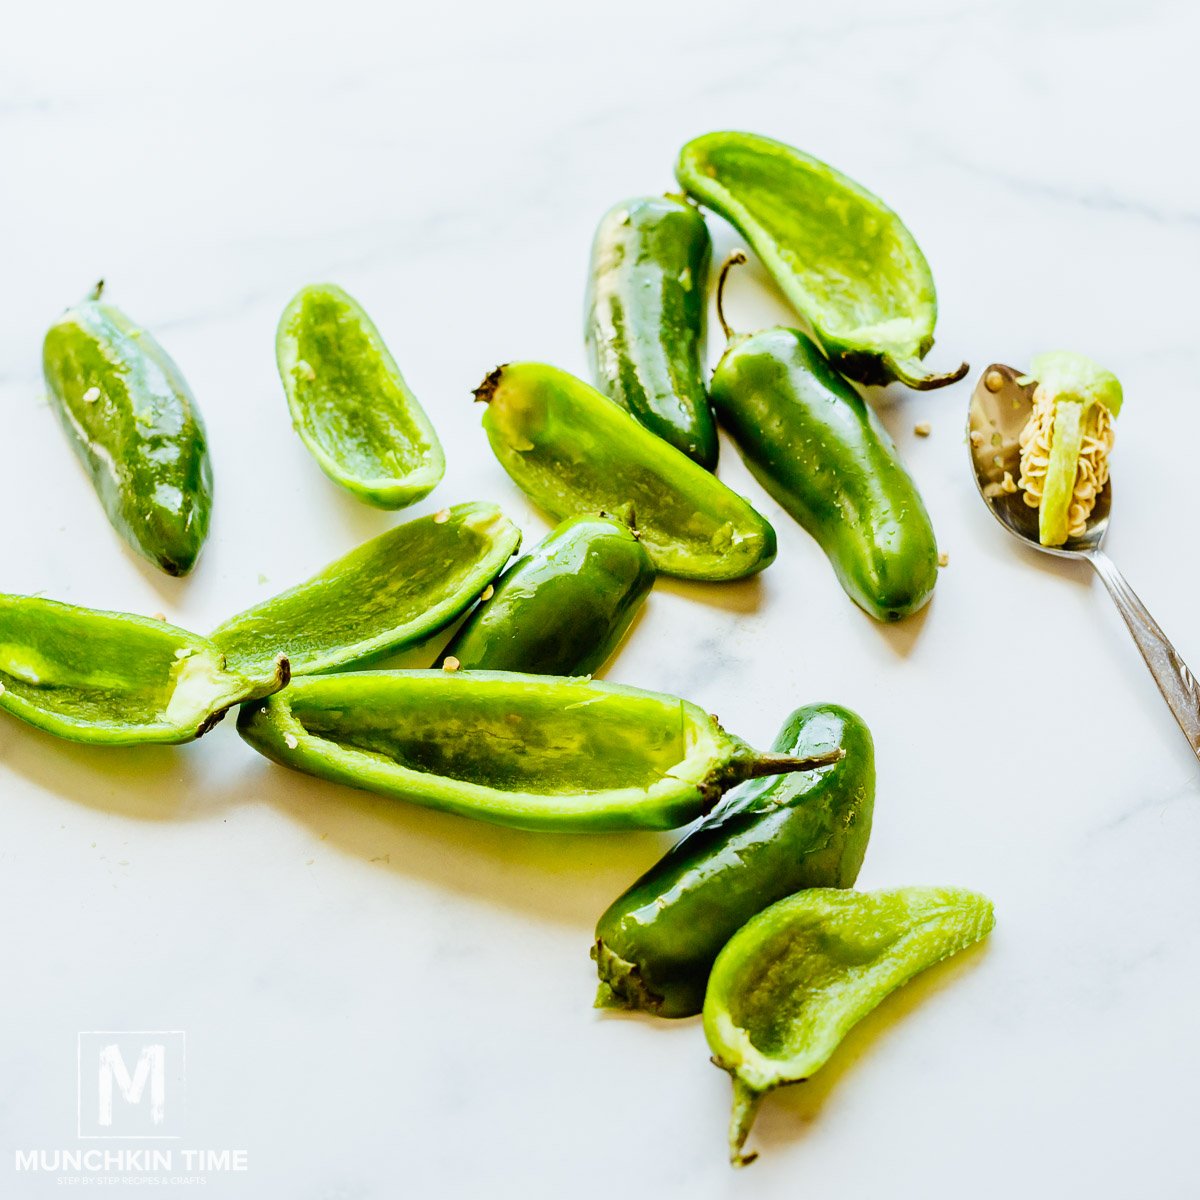 How to Cut a Jalapeno